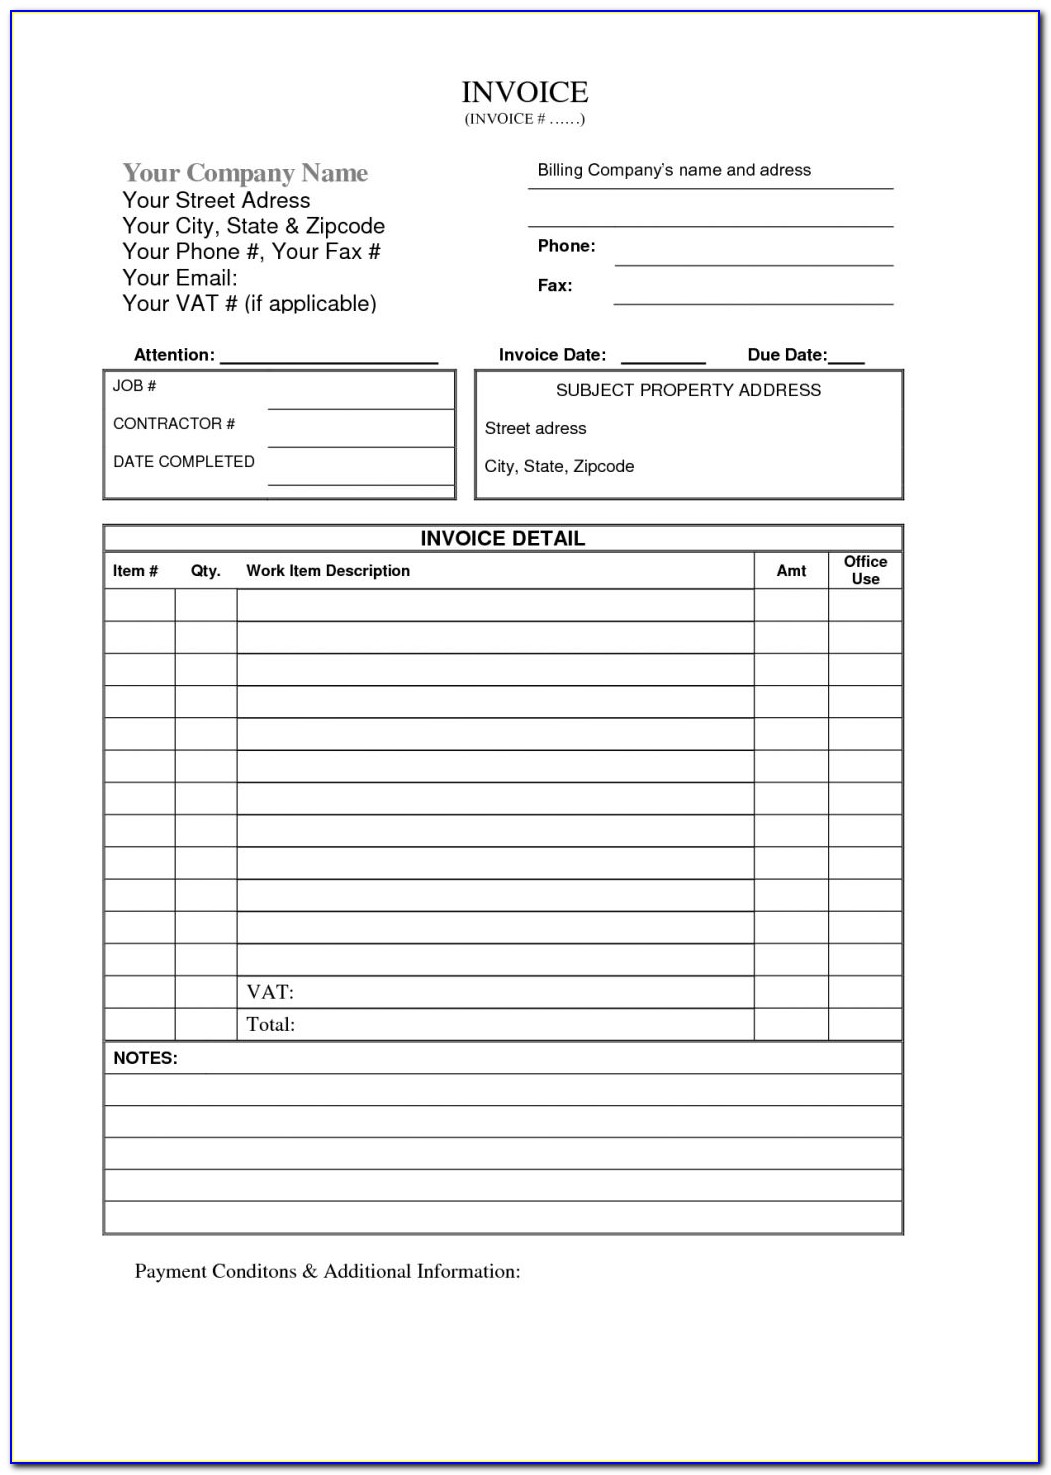 1099 Invoice Template Excel